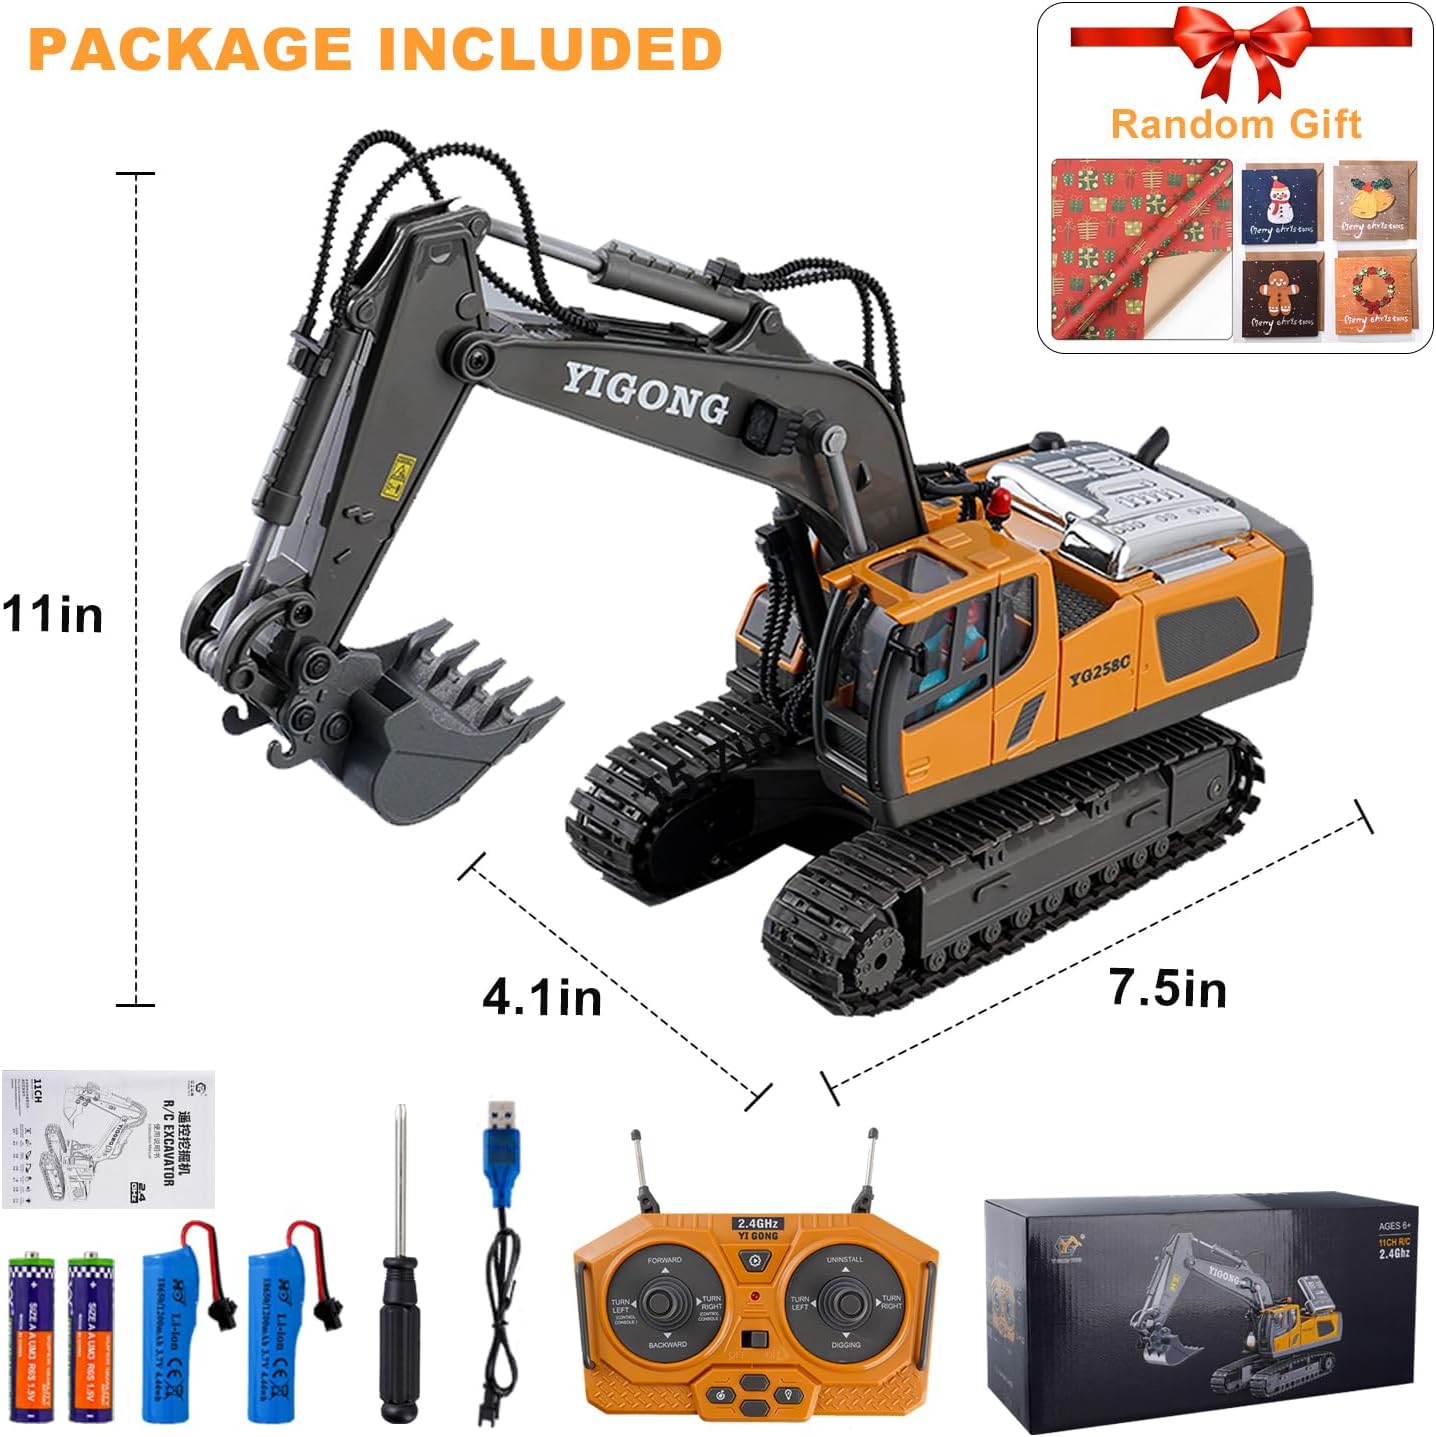 Cogwak RC Excavator Toy: The Ultimate Construction Toy for Boys - A Comprehensive Review